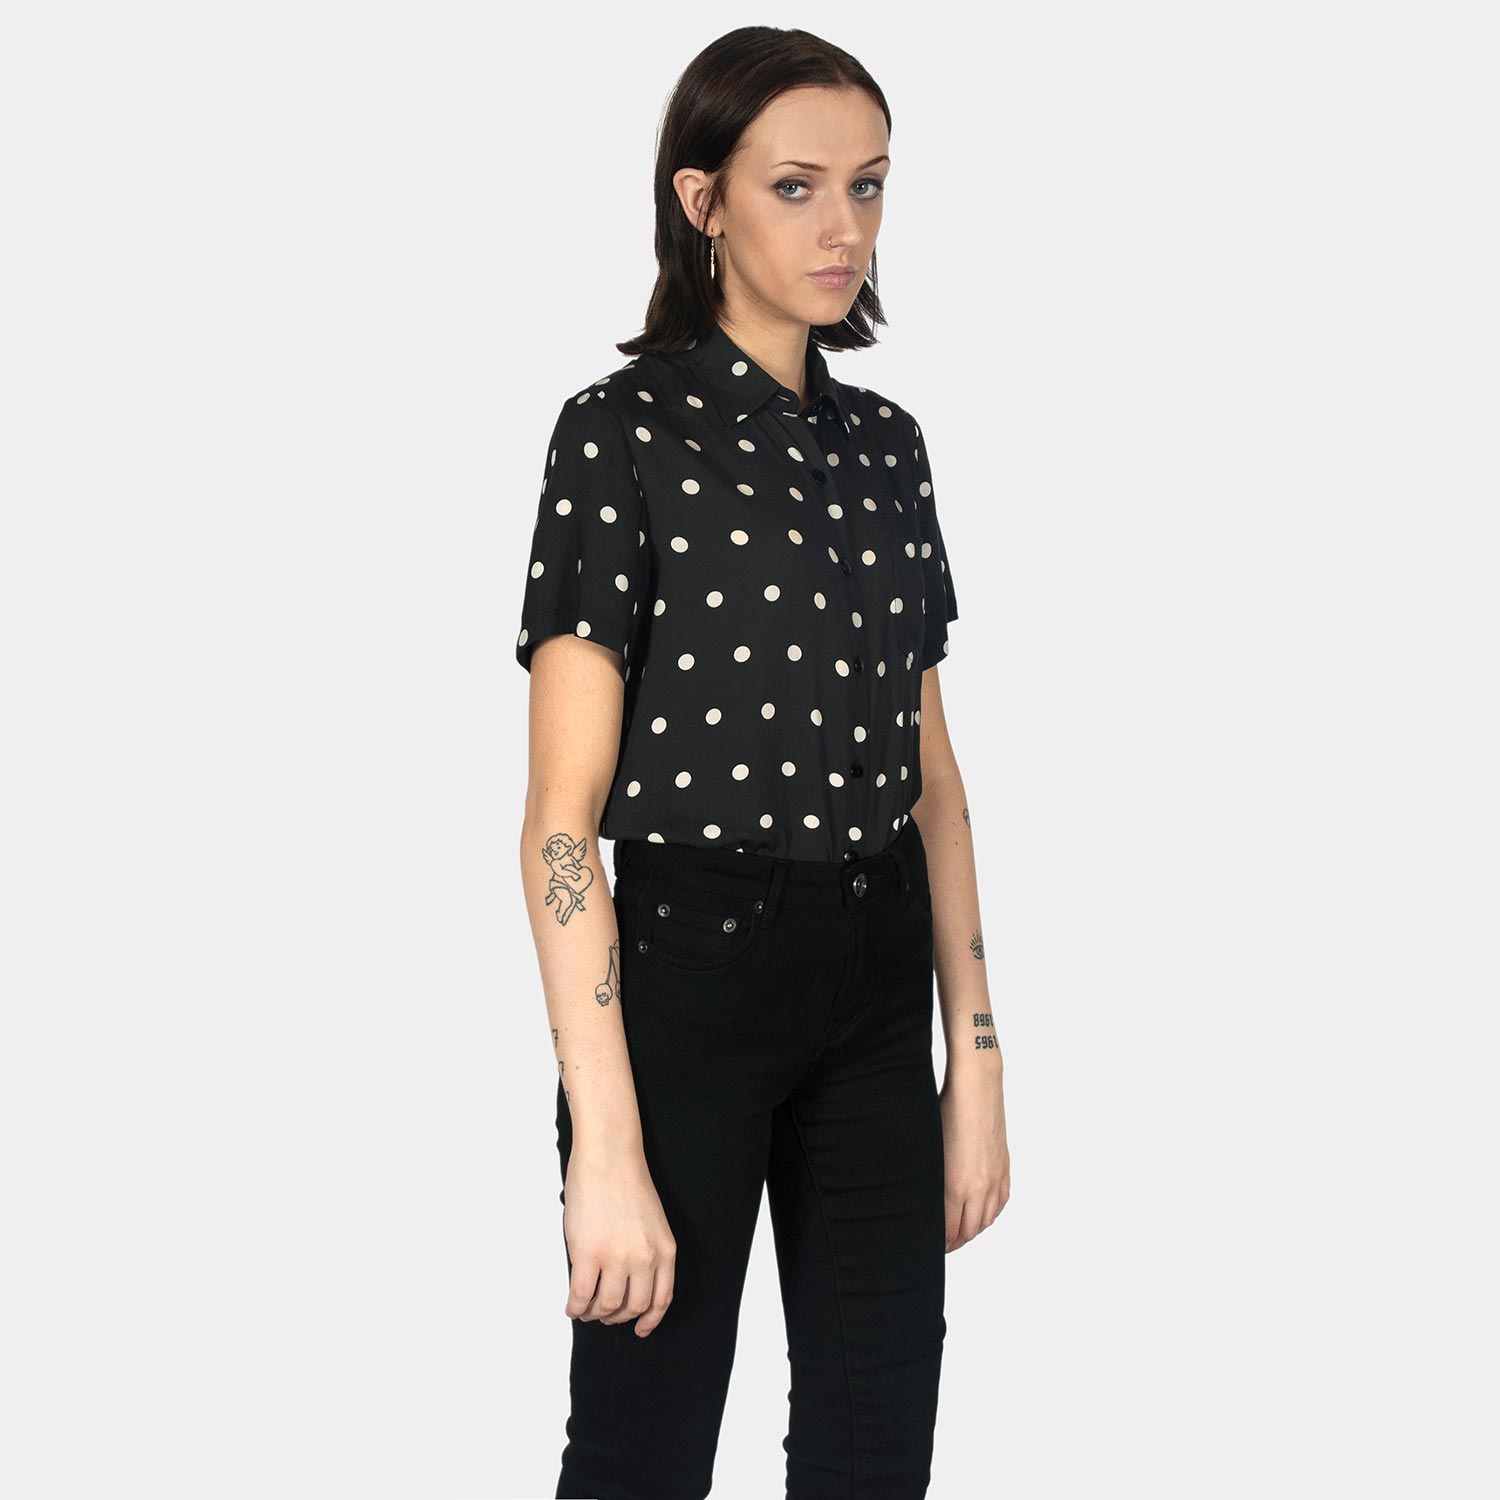 Stepping Stone - Black and White Polka Dot Shirt - Women's by Straight to Hell